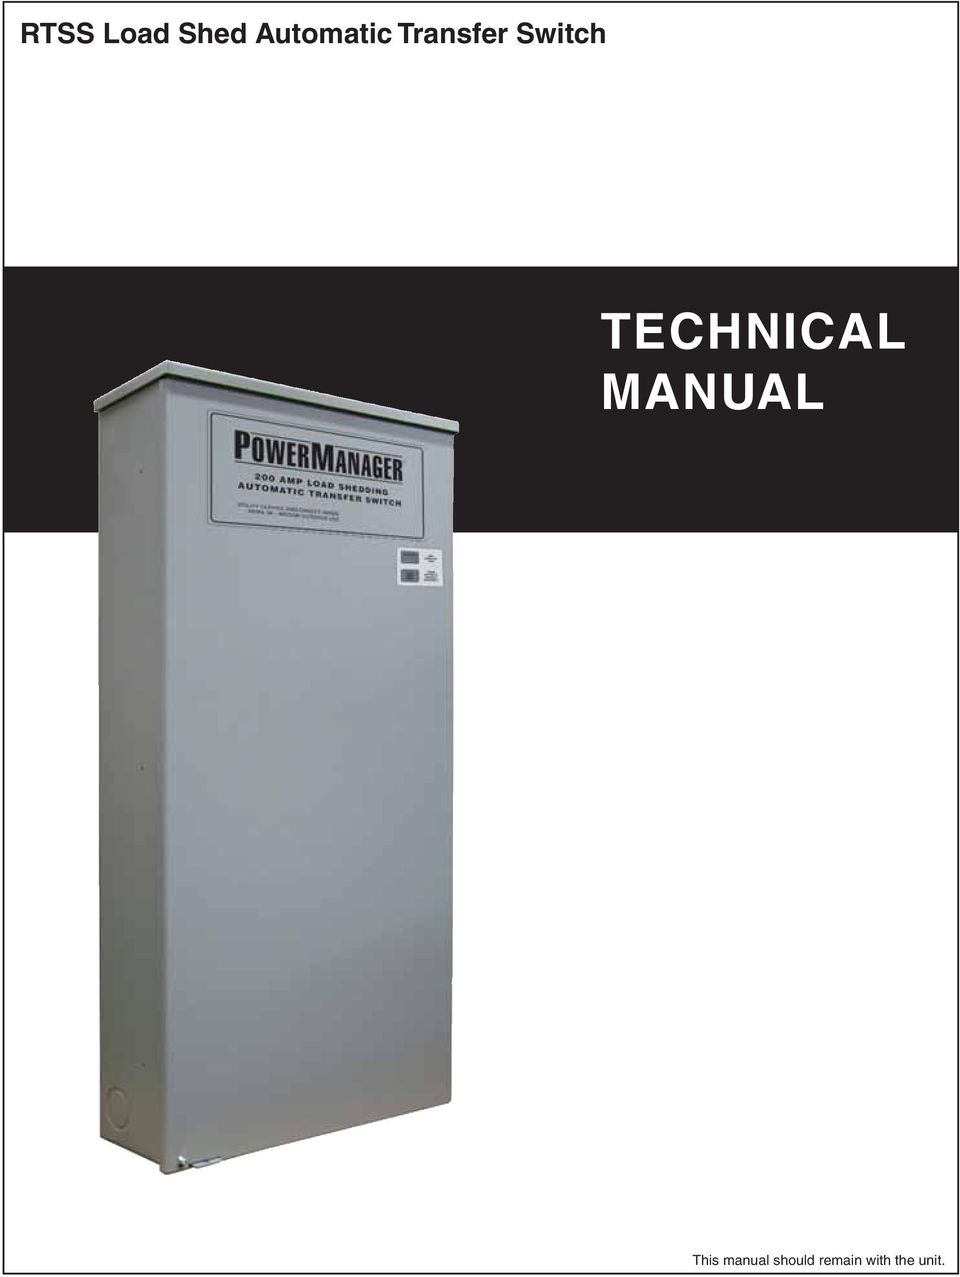 TECHNICAL MANUAL This